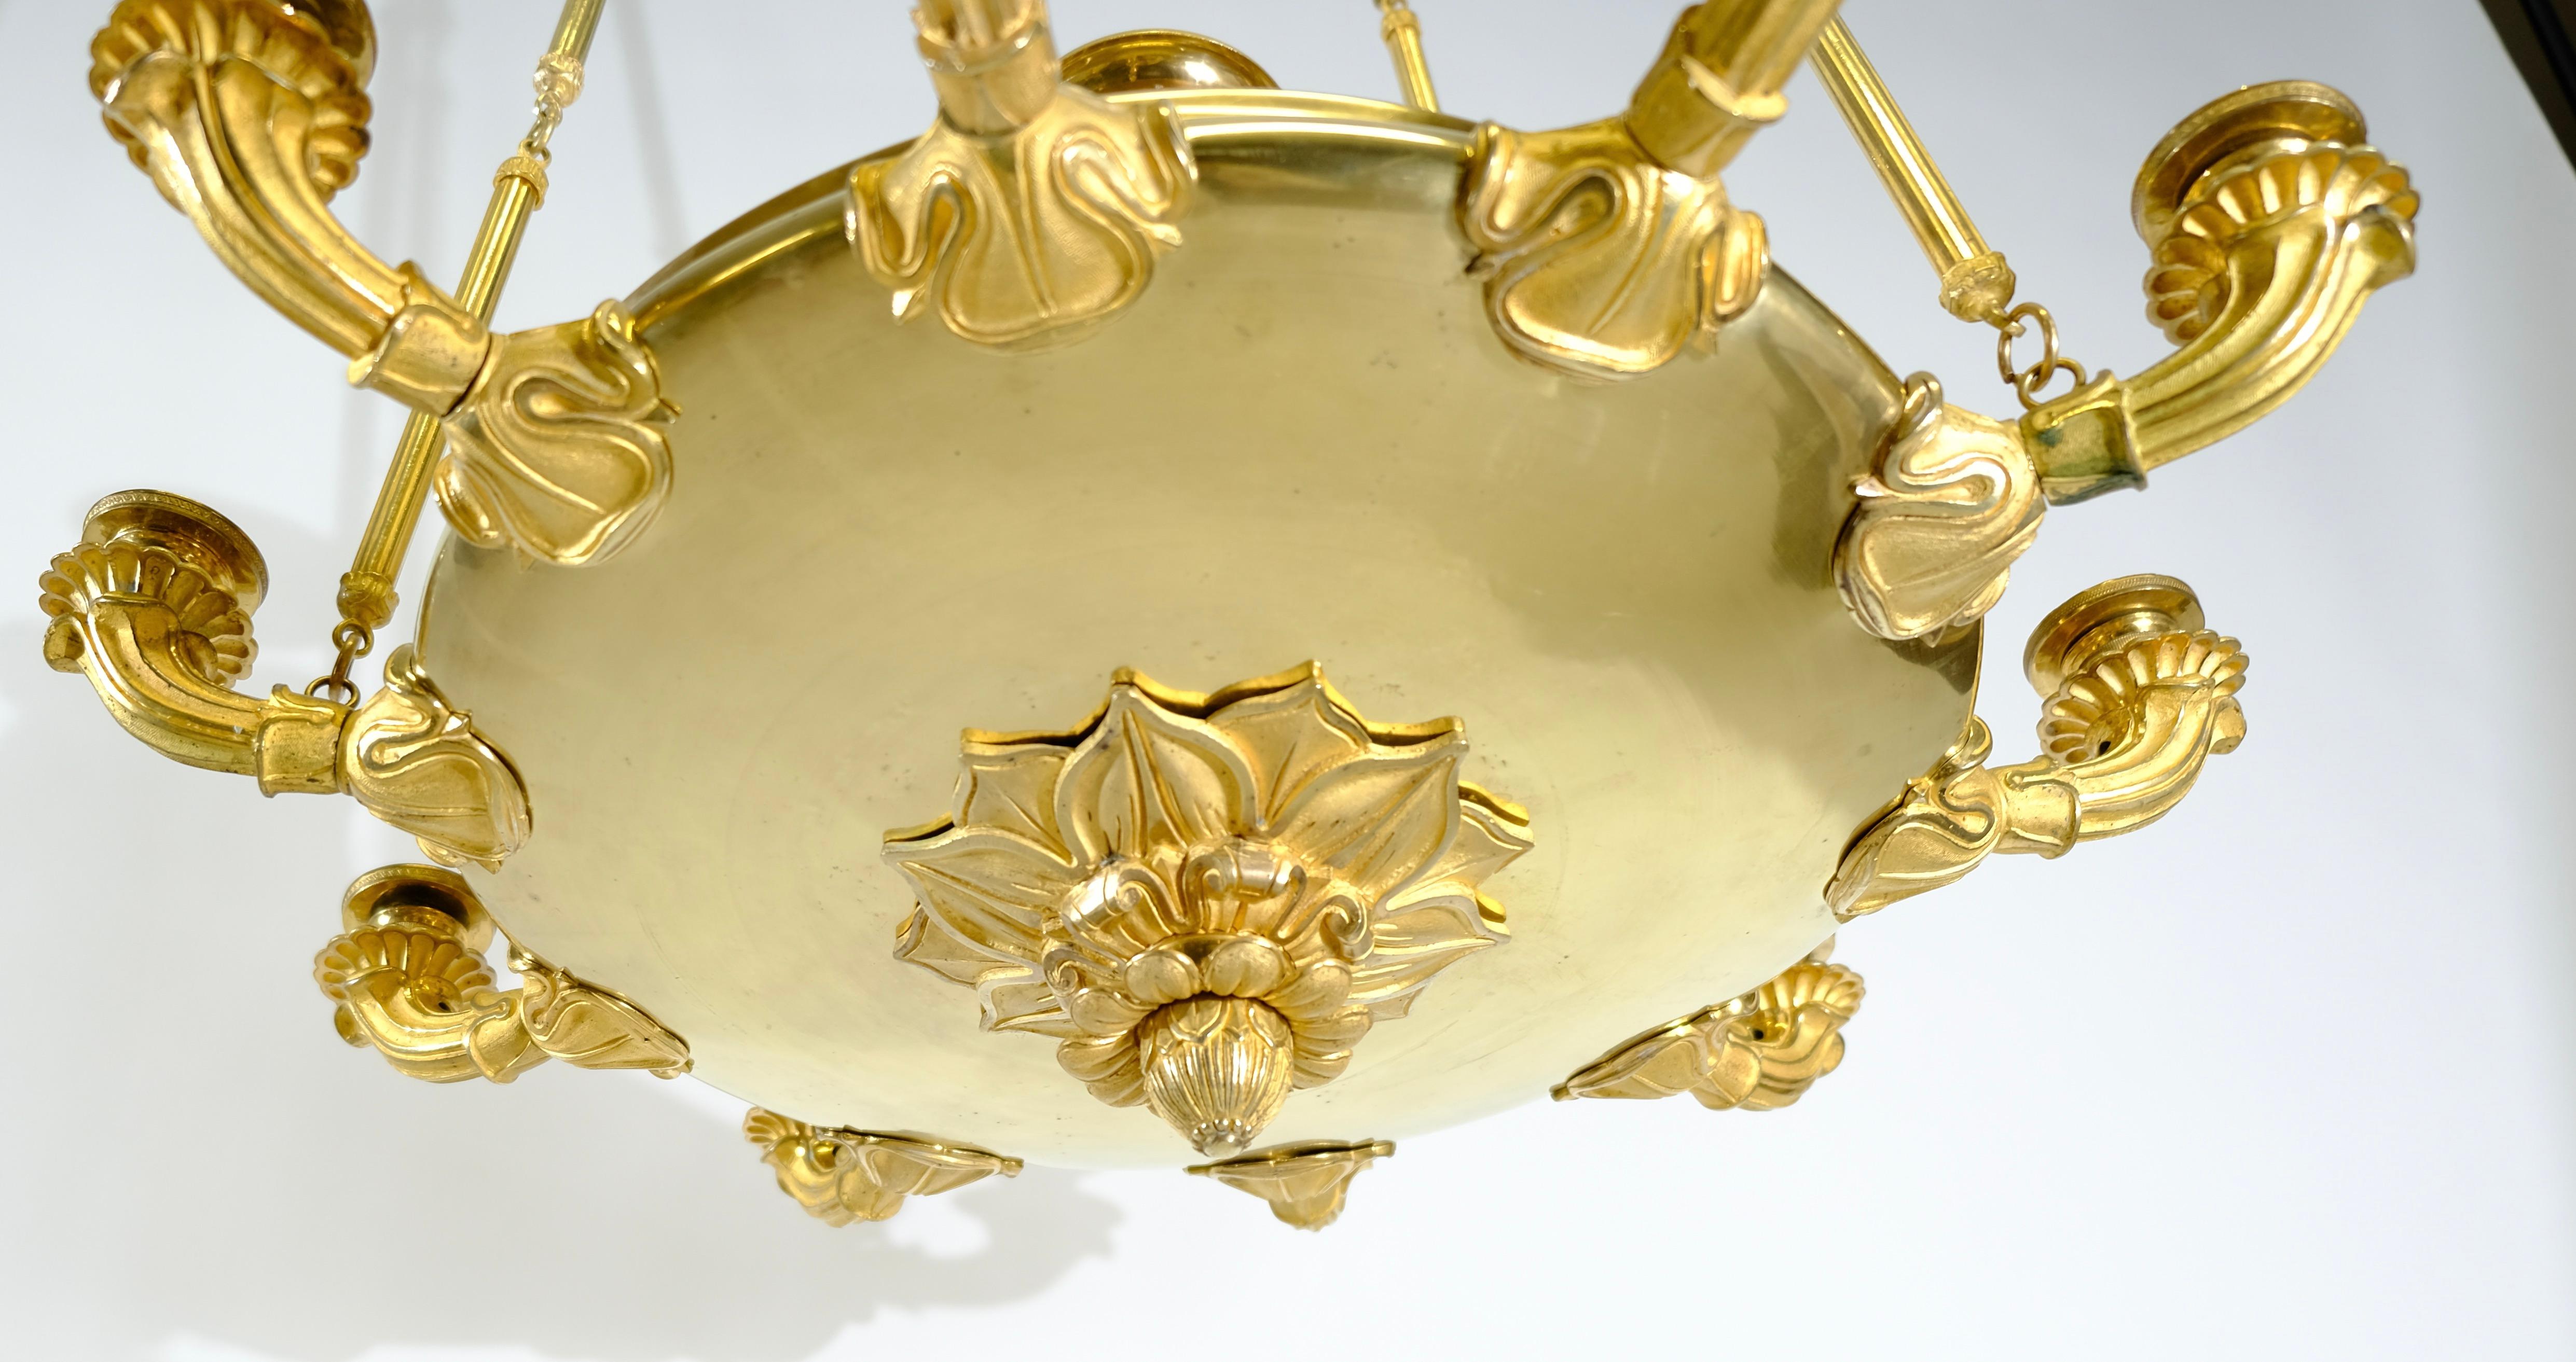 A unusually large chandelier with a beautiful design. The chains that holds the chandelier are of an interesting shape with grooved pipes and rings. The pressure-turned saucer-like central piece holds the ten cast gilt bronze arms with